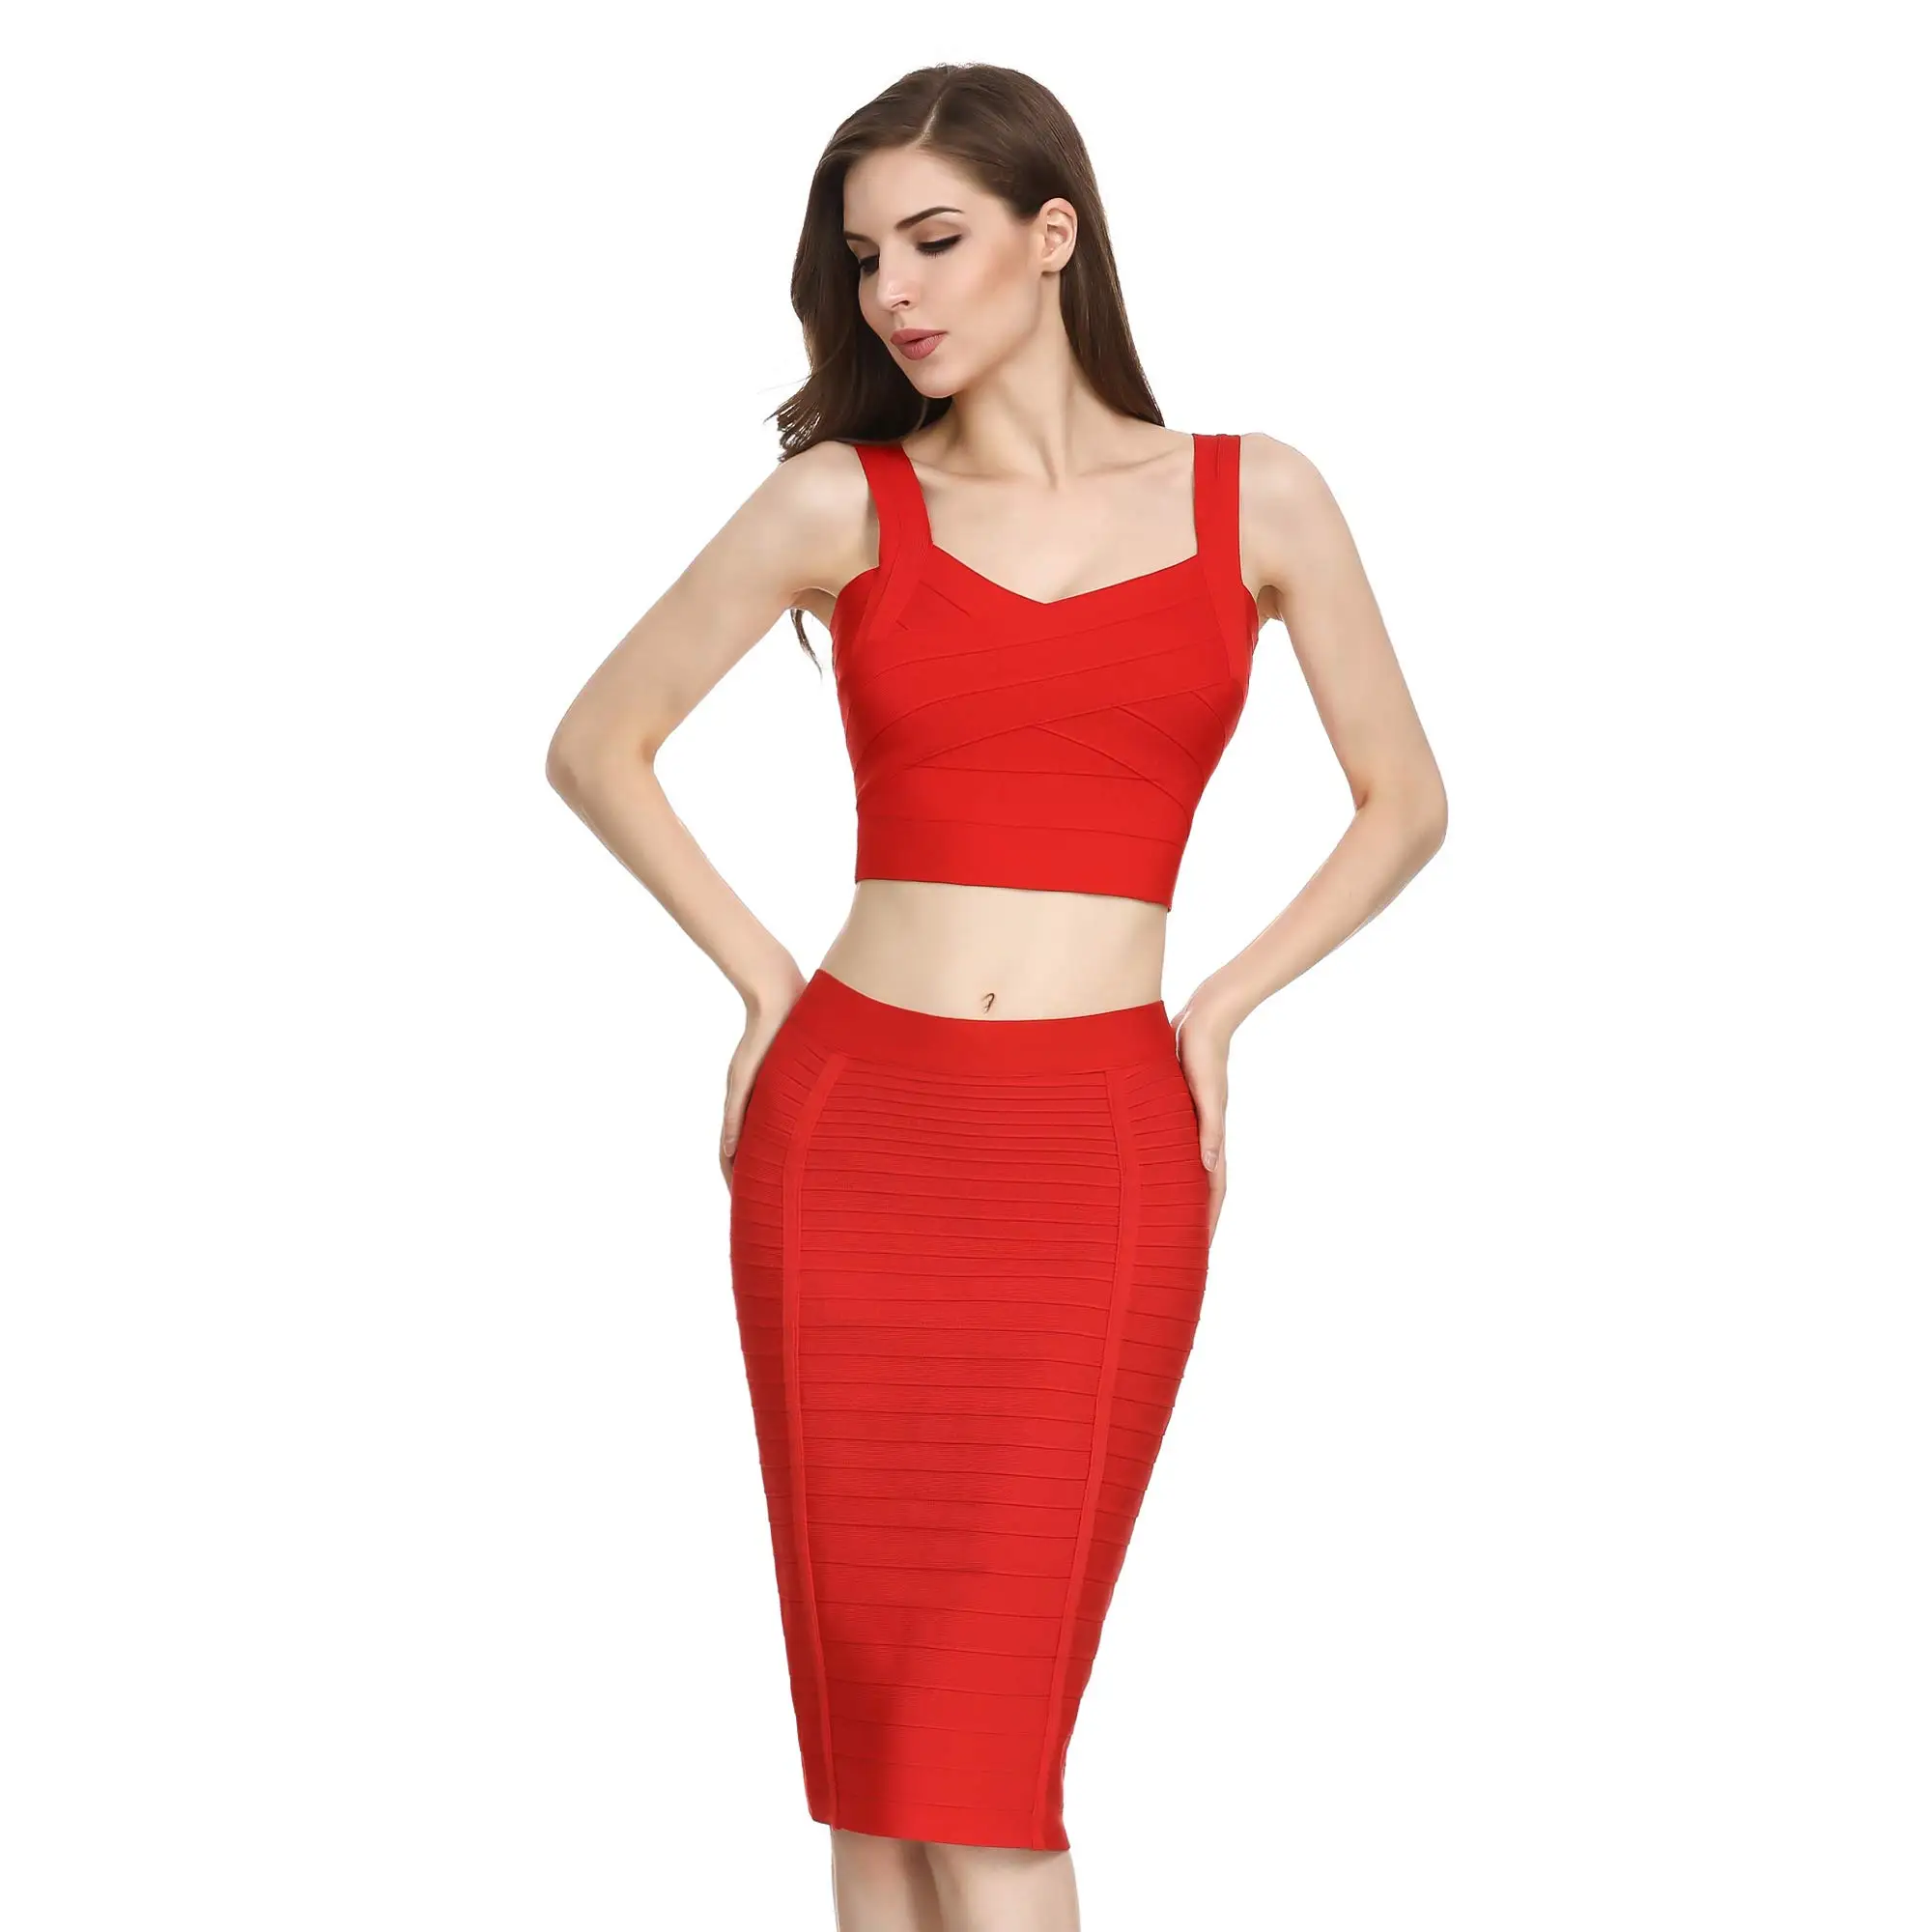 black pleated skirt High Waist New Fashion 2018 Sexy Ladies Pencil Knee Length Bandage Bodycon Skirt Red Striped zipper office lady wear long skirts for women